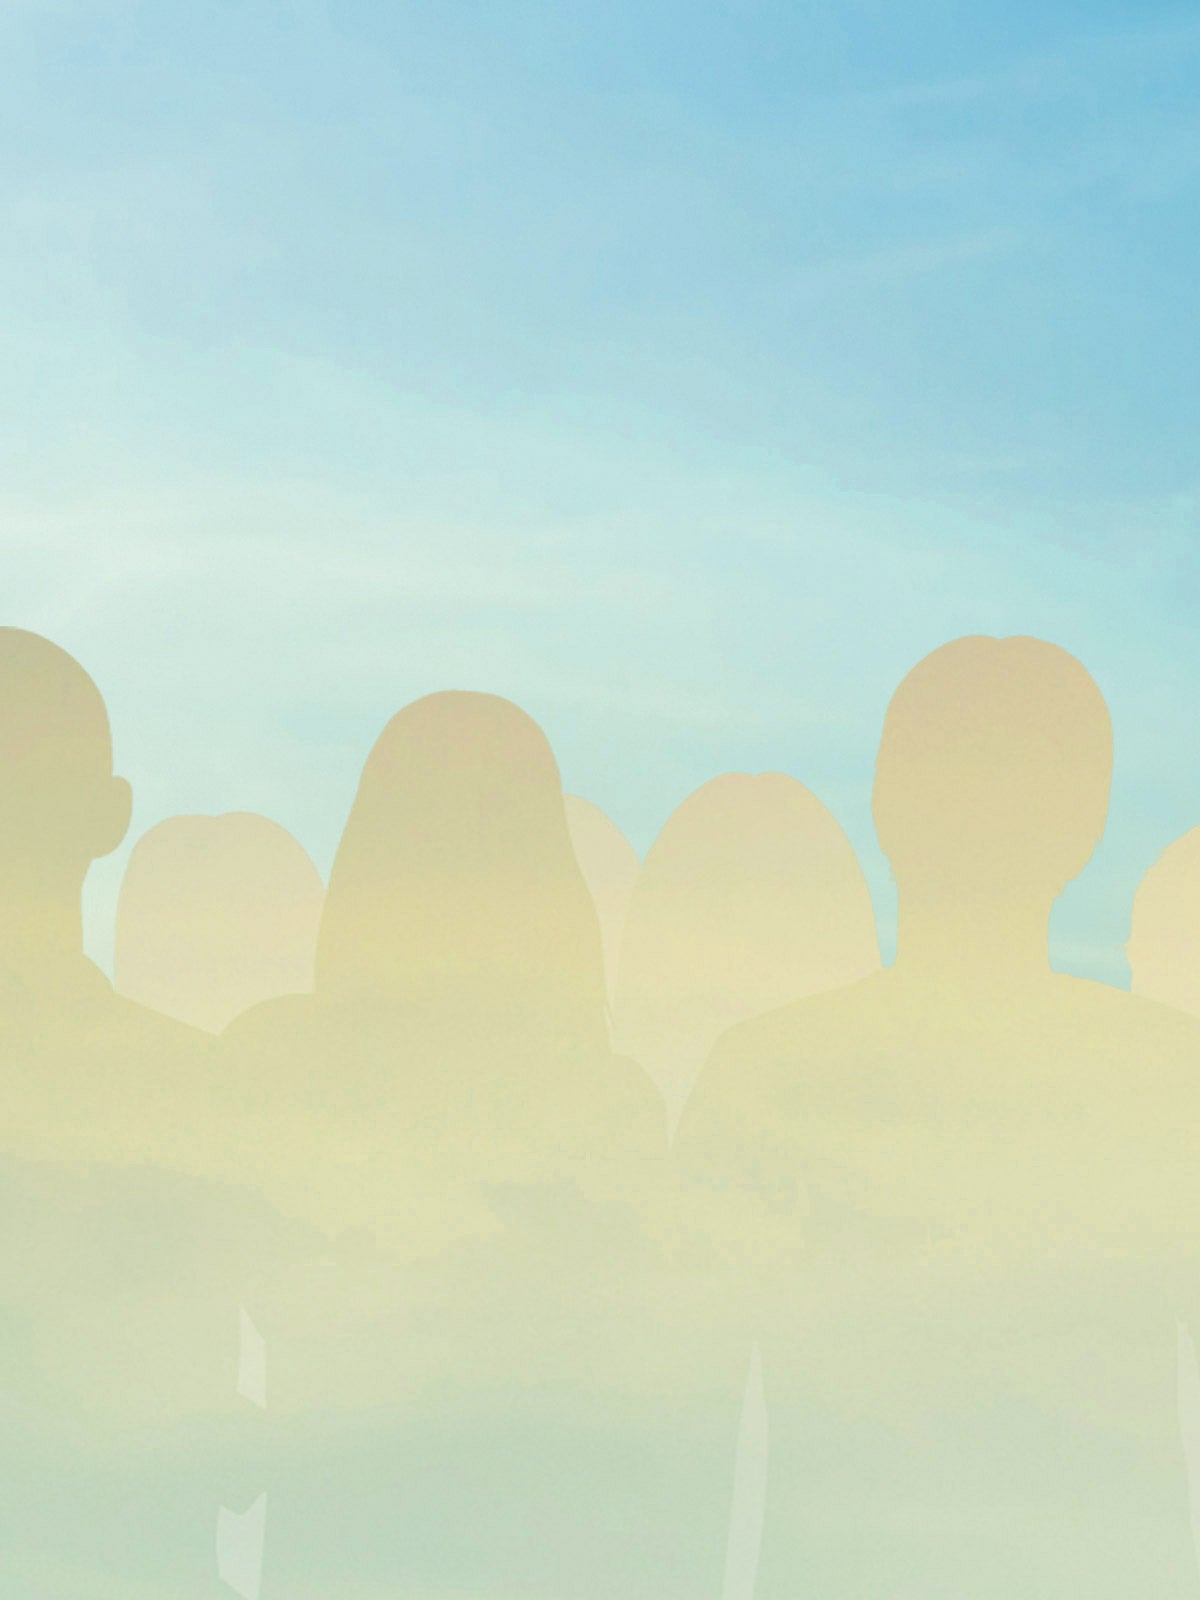 Illustration: A crowd of people silhouetted by a warm sky, filled with similar colors.